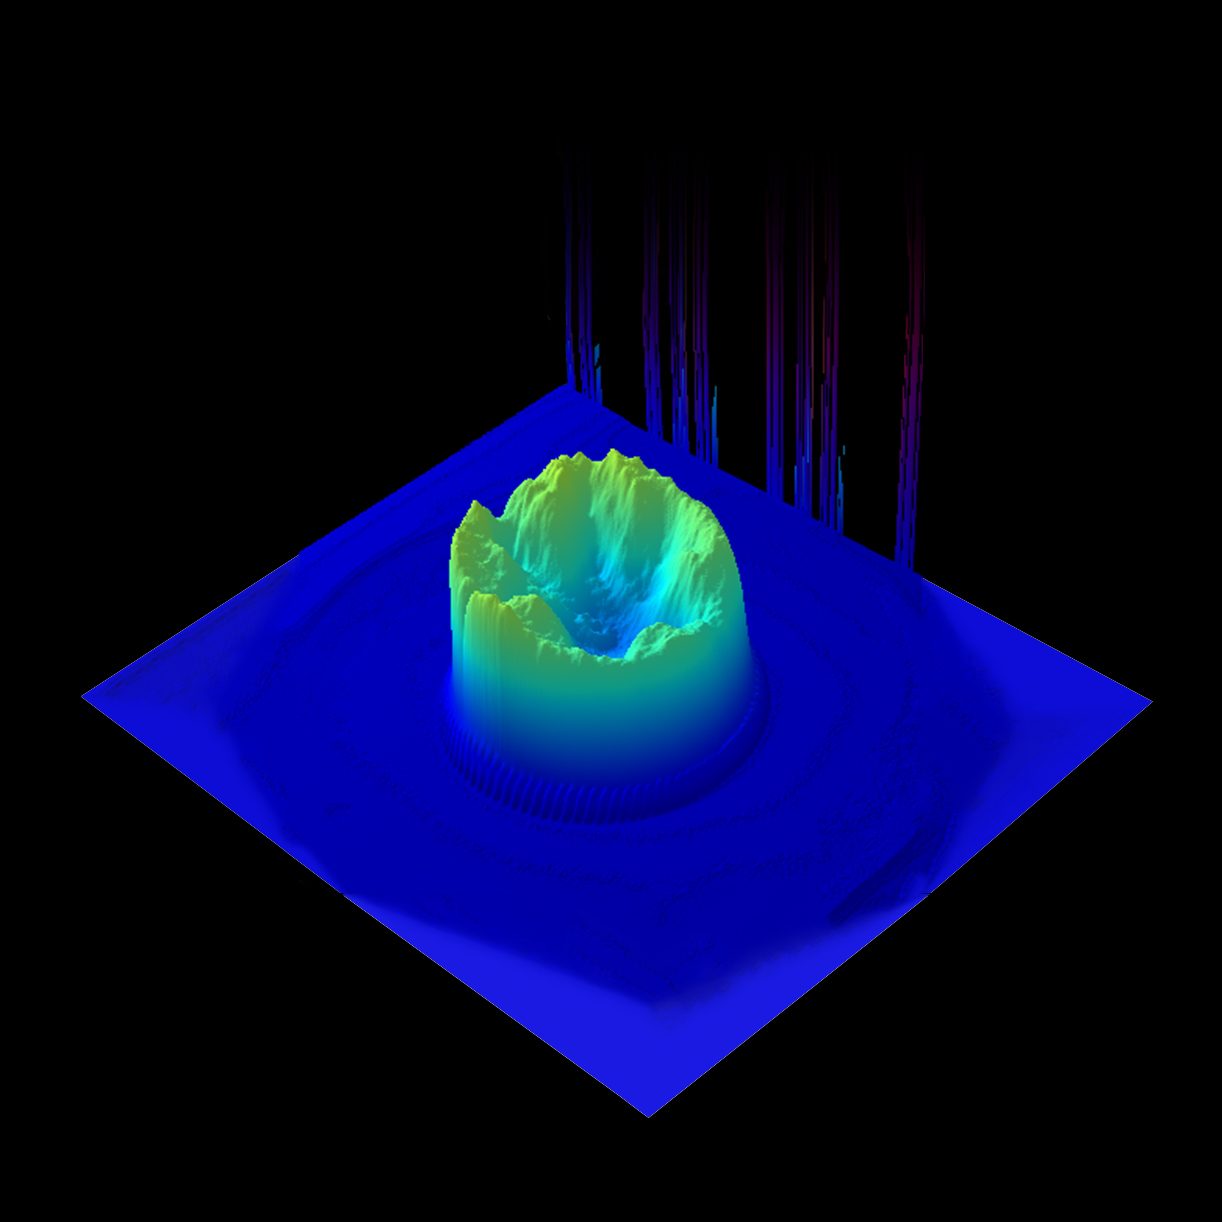 3D Rendering Of The Loose Cap Example Thermal Image